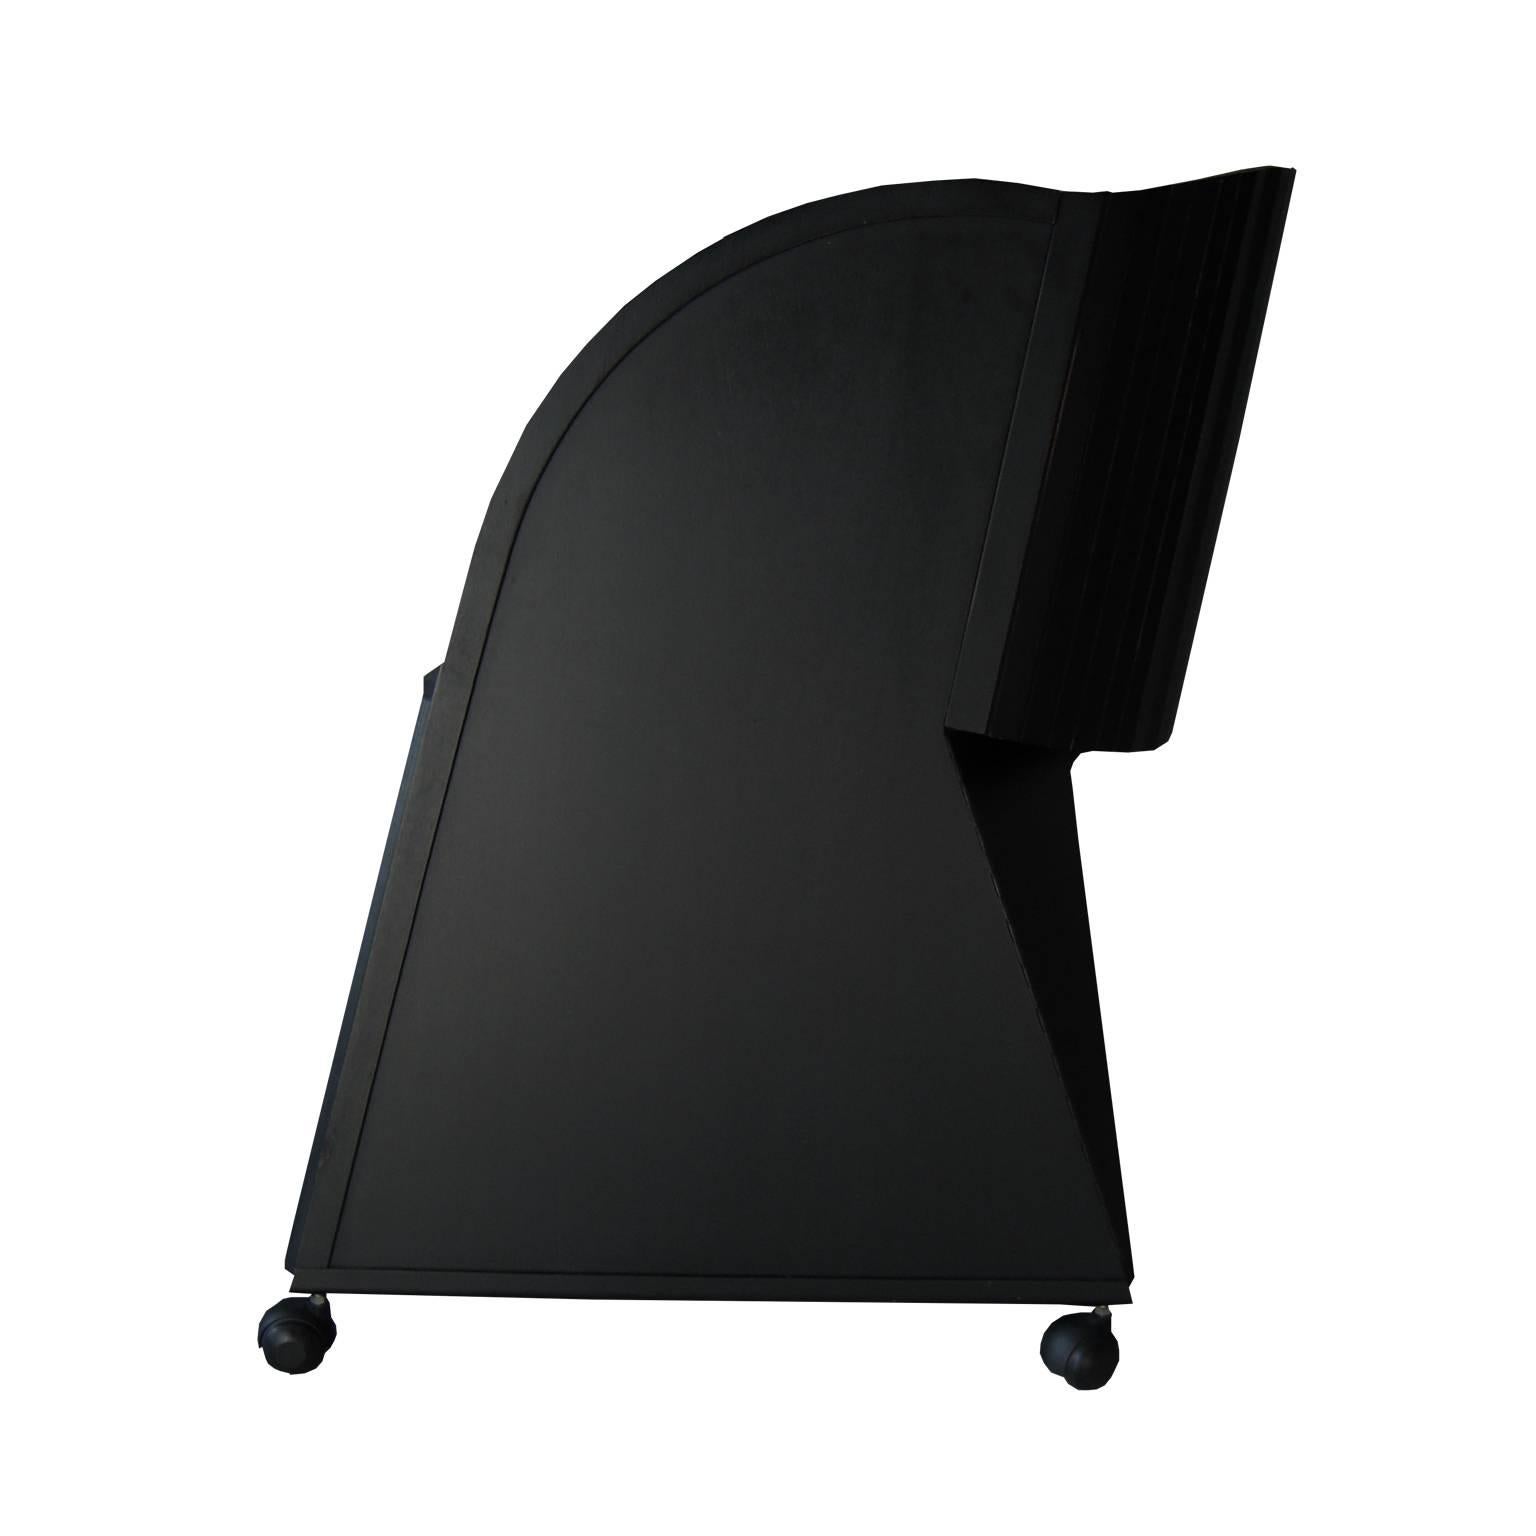 ART. 50250 folding chair with castors polished solid wood, was designed by Adriano and Paolo Suman for Matrix, a division of Giorgetti of Meda (Milano) born in 1985.
Every pieces of Matrix furniture is a real work of art, almost a one-off, due to